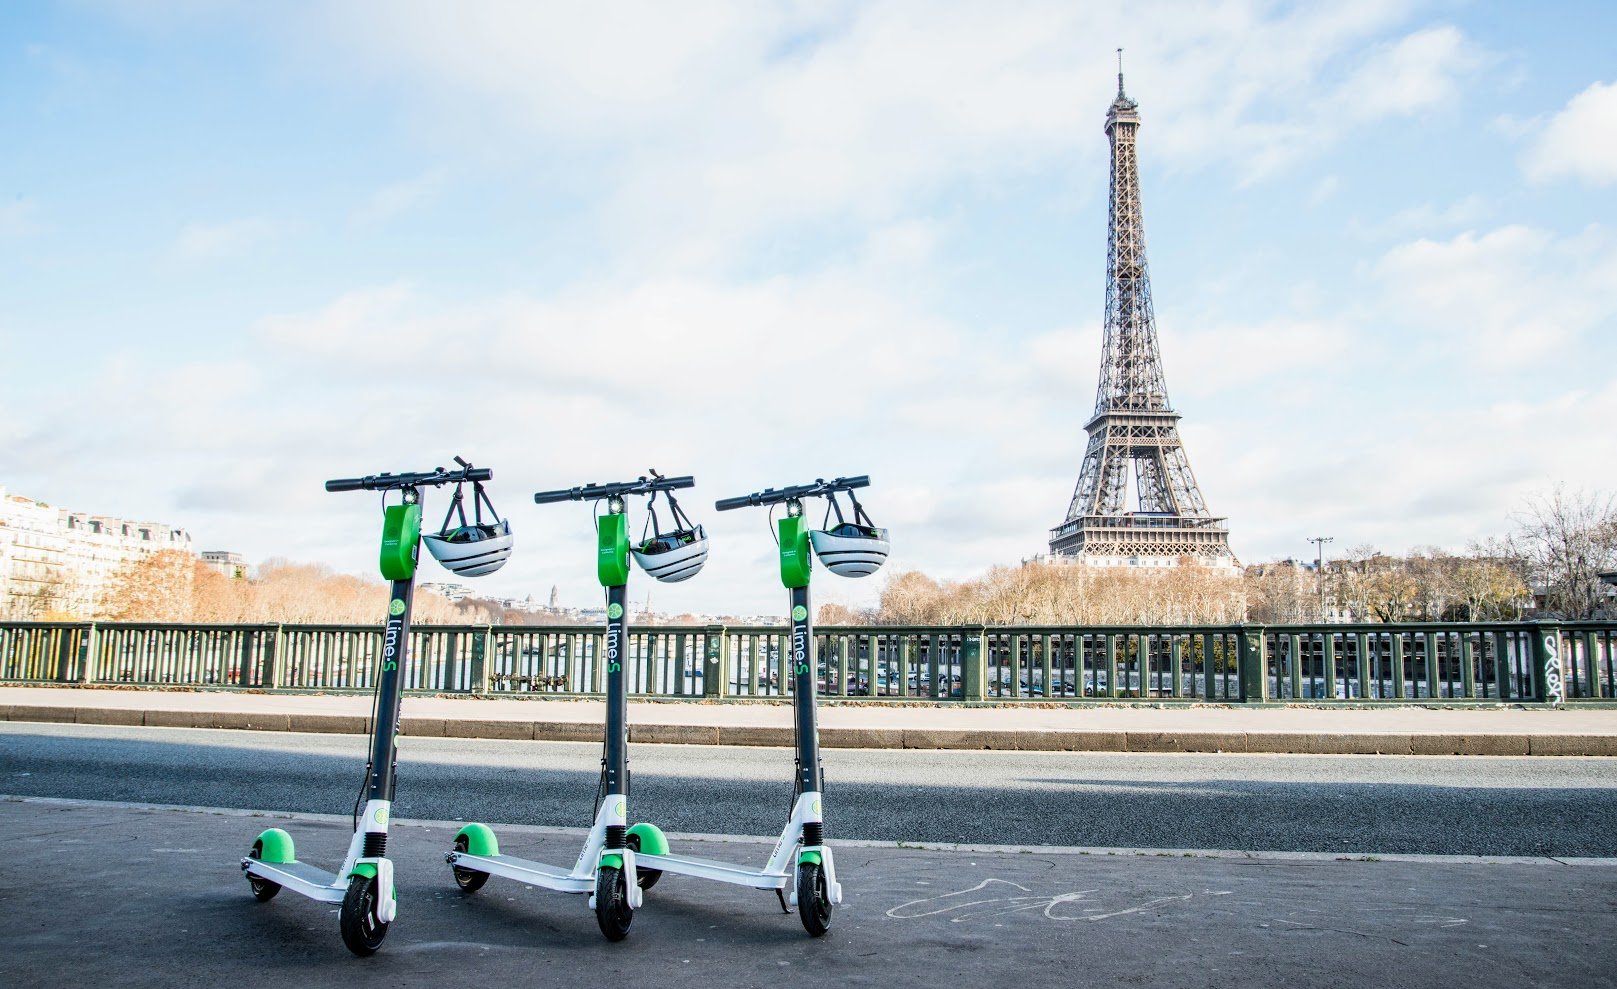 Paris will forcefully limit the speed of rental electric scooters to 10 km/h